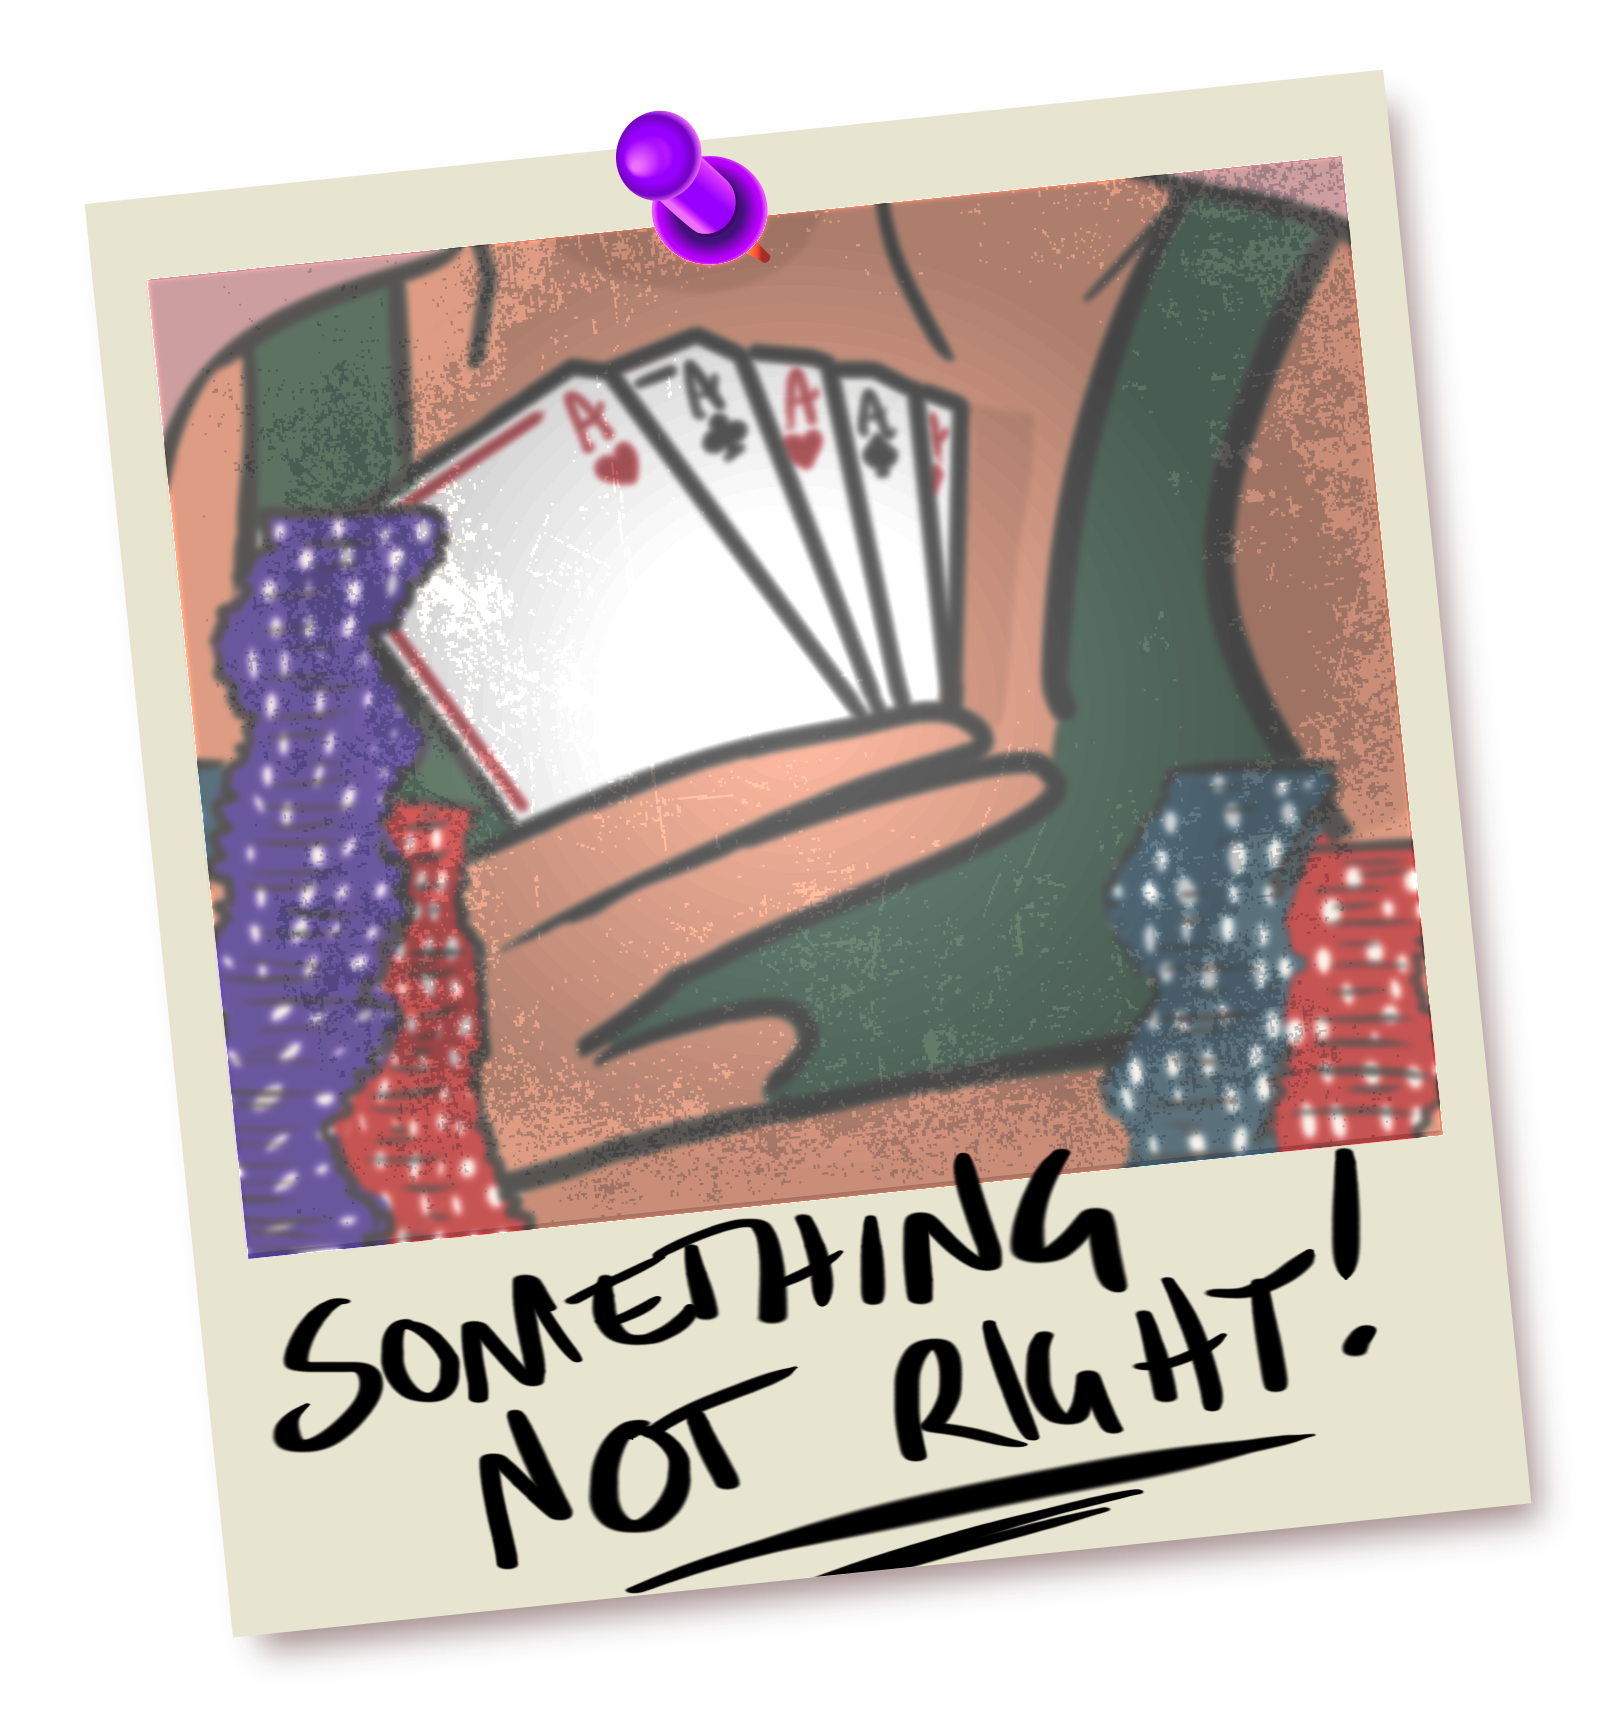 Illustration in the style of a Polaroid photo pinned to a wall. It shows somebody revealing their poker hand to the viewer, from behind many stacks of chips, with the handwritten label 'something not right'. Upon close inspection, one can just barely see that all five cards in the hand are aces.